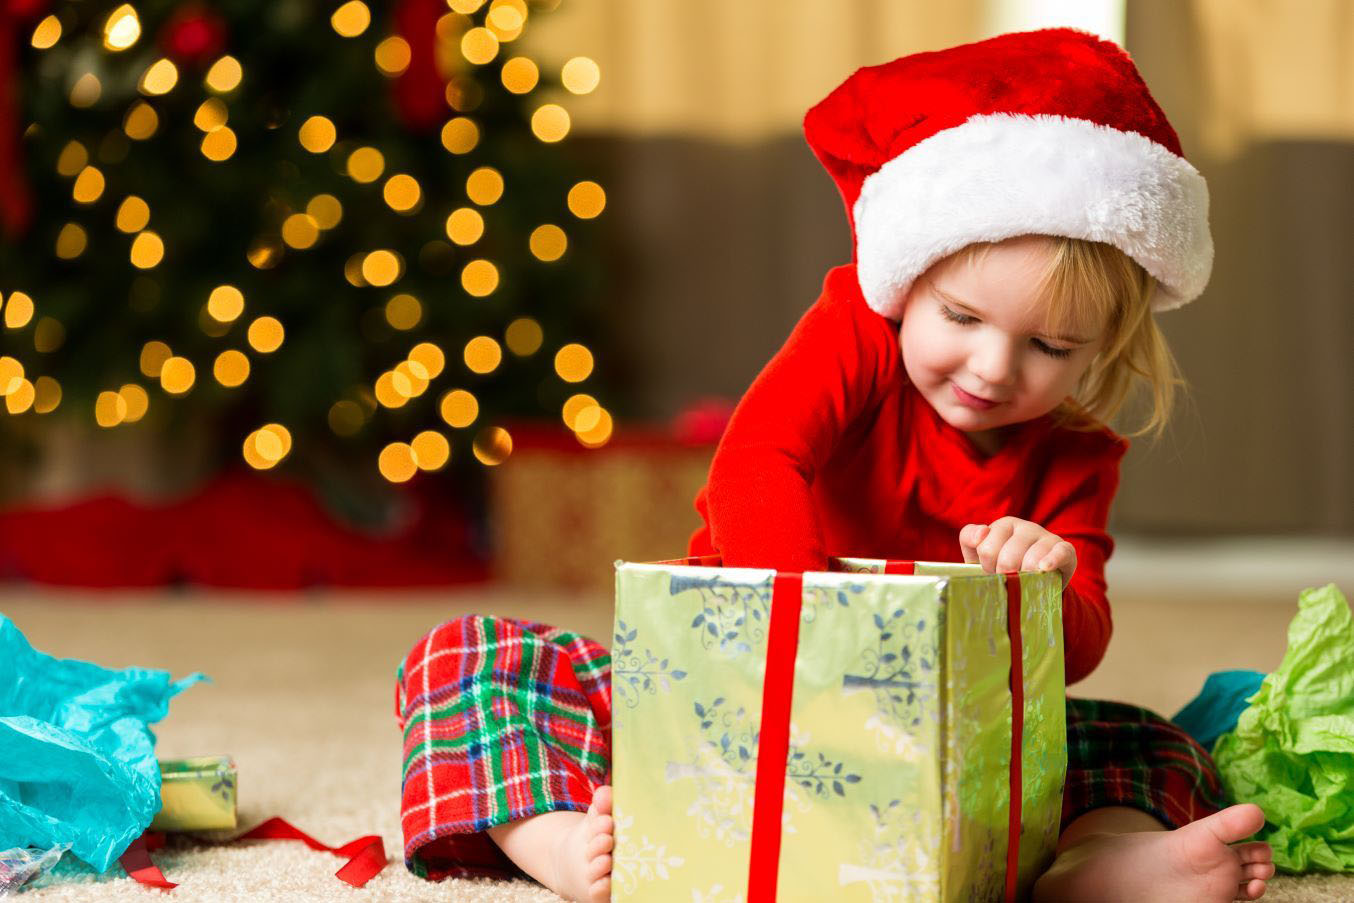 A little girl sits under a Christmas tree wearing a Santa hat. She's reaching into a gift box to pull out a toy.